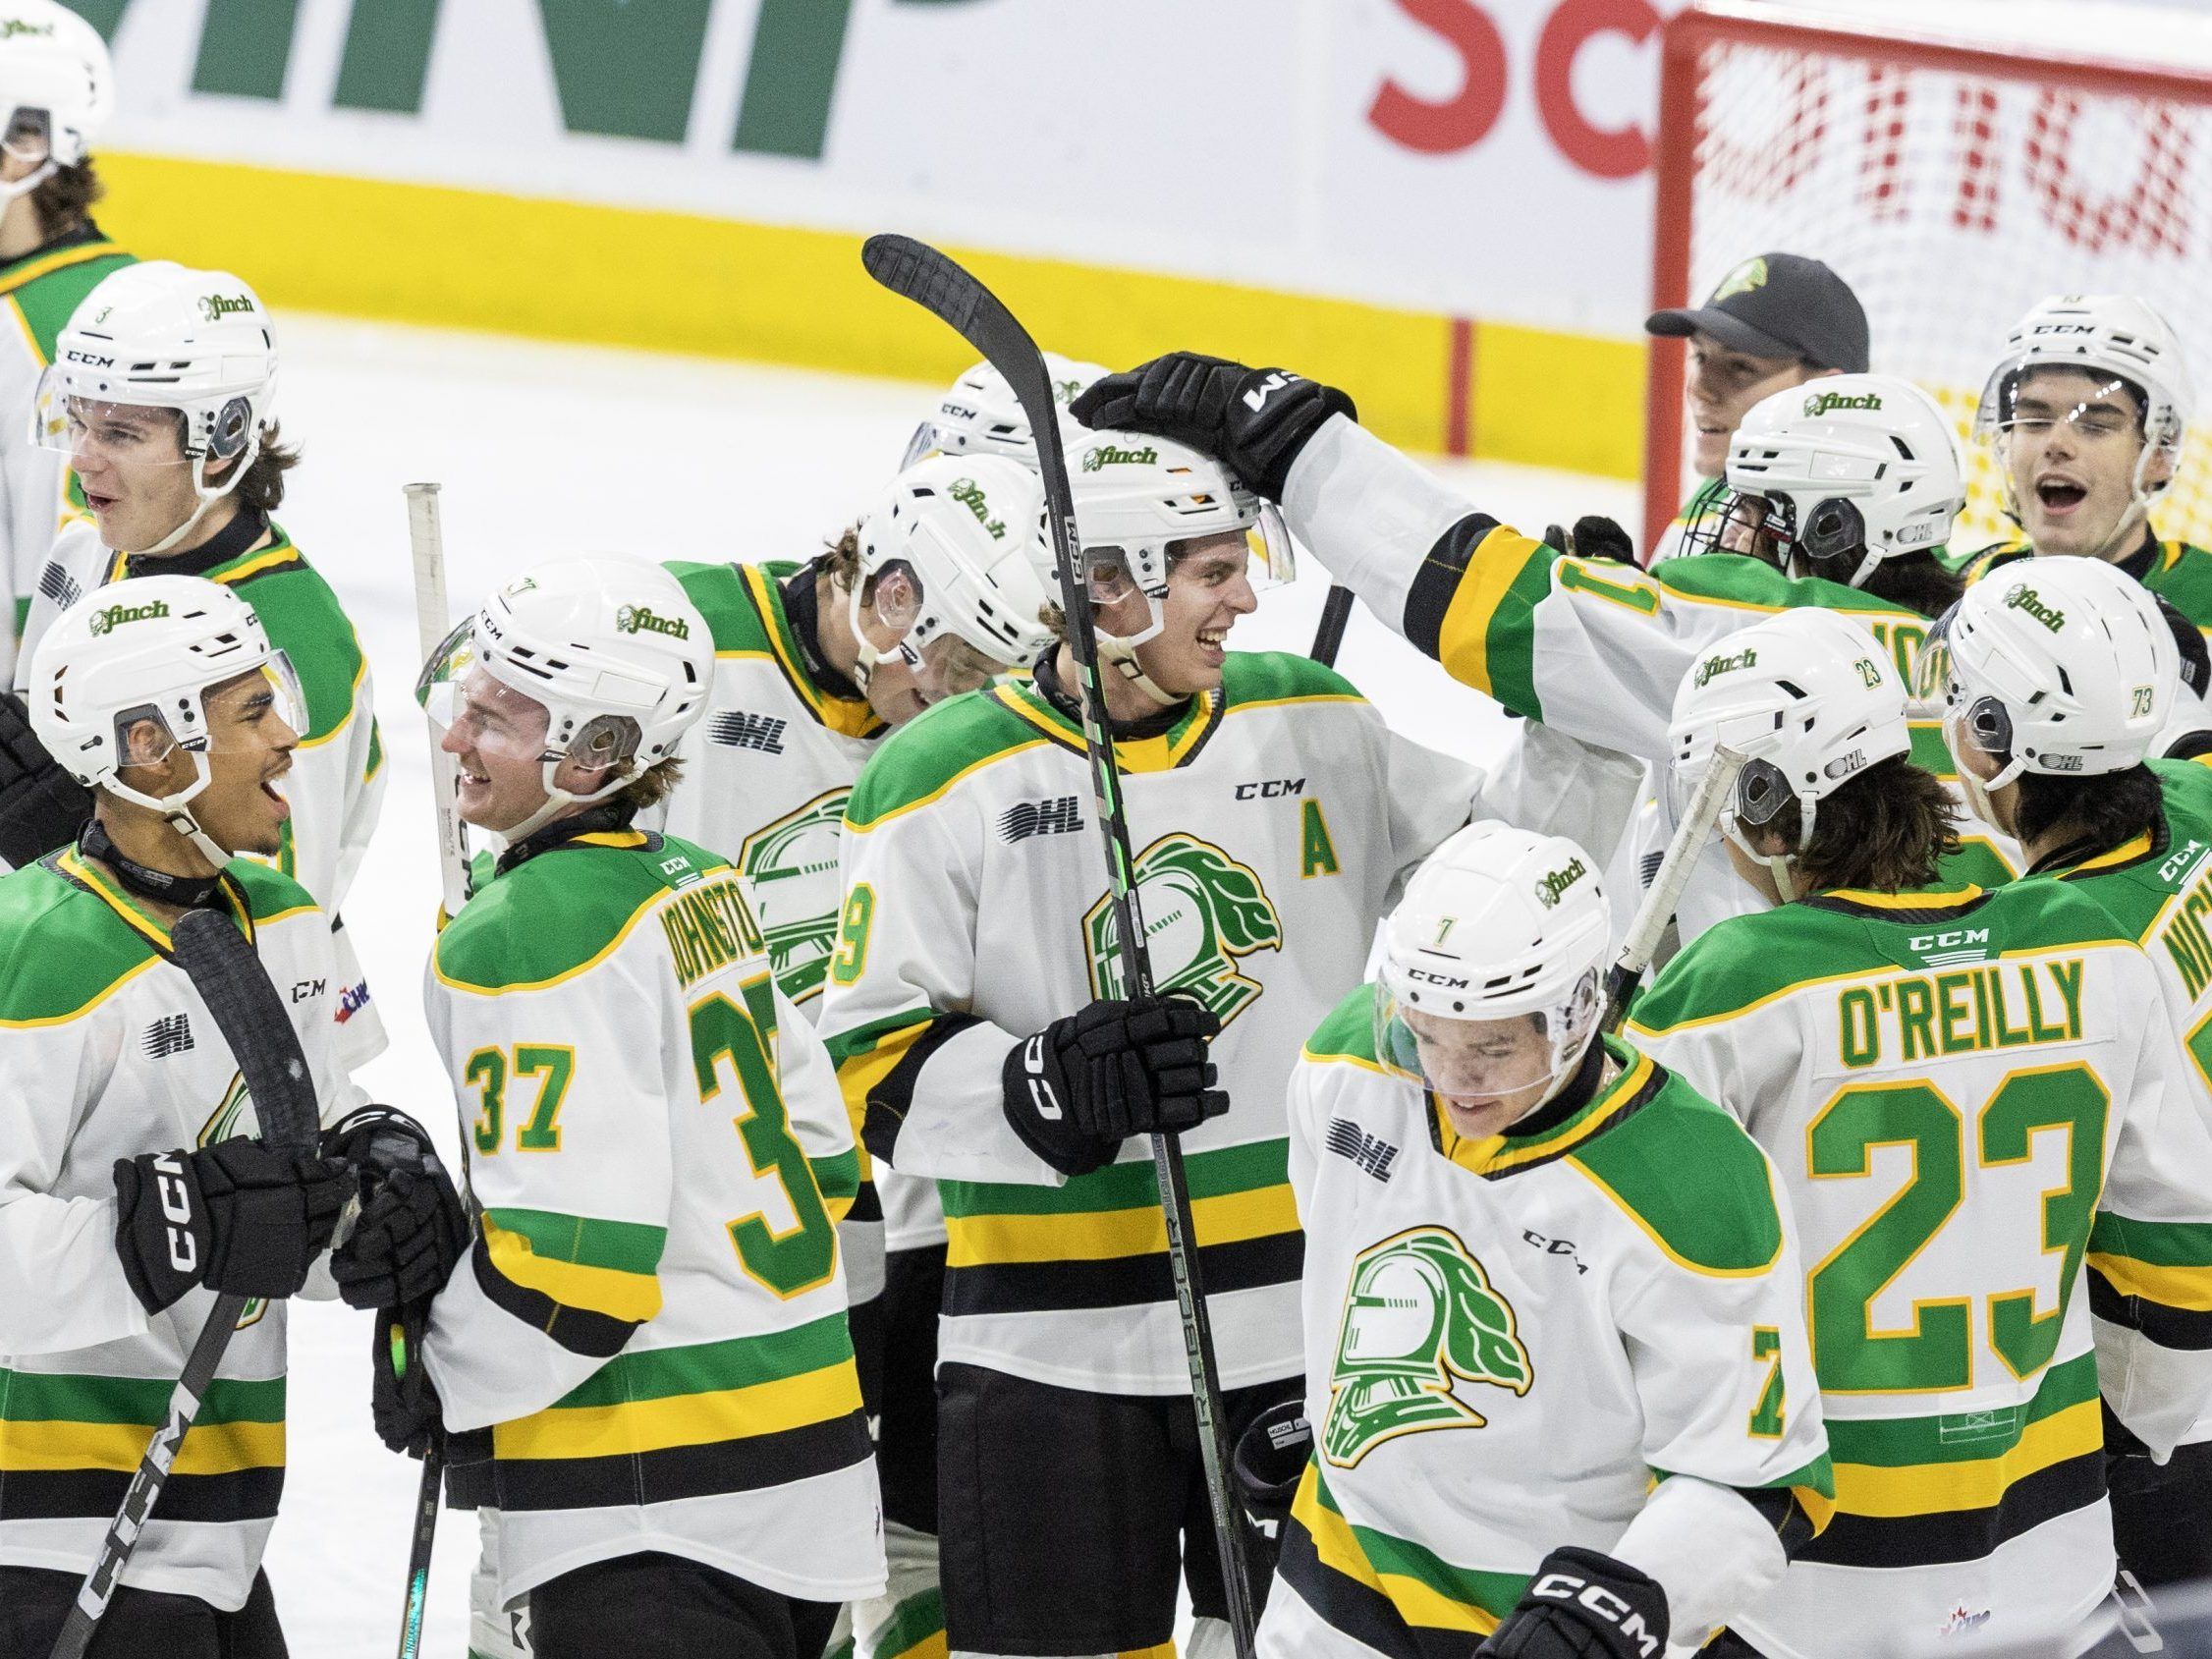 Rookie's first goal sparks London Knights win over Sarnia: 'Amazing